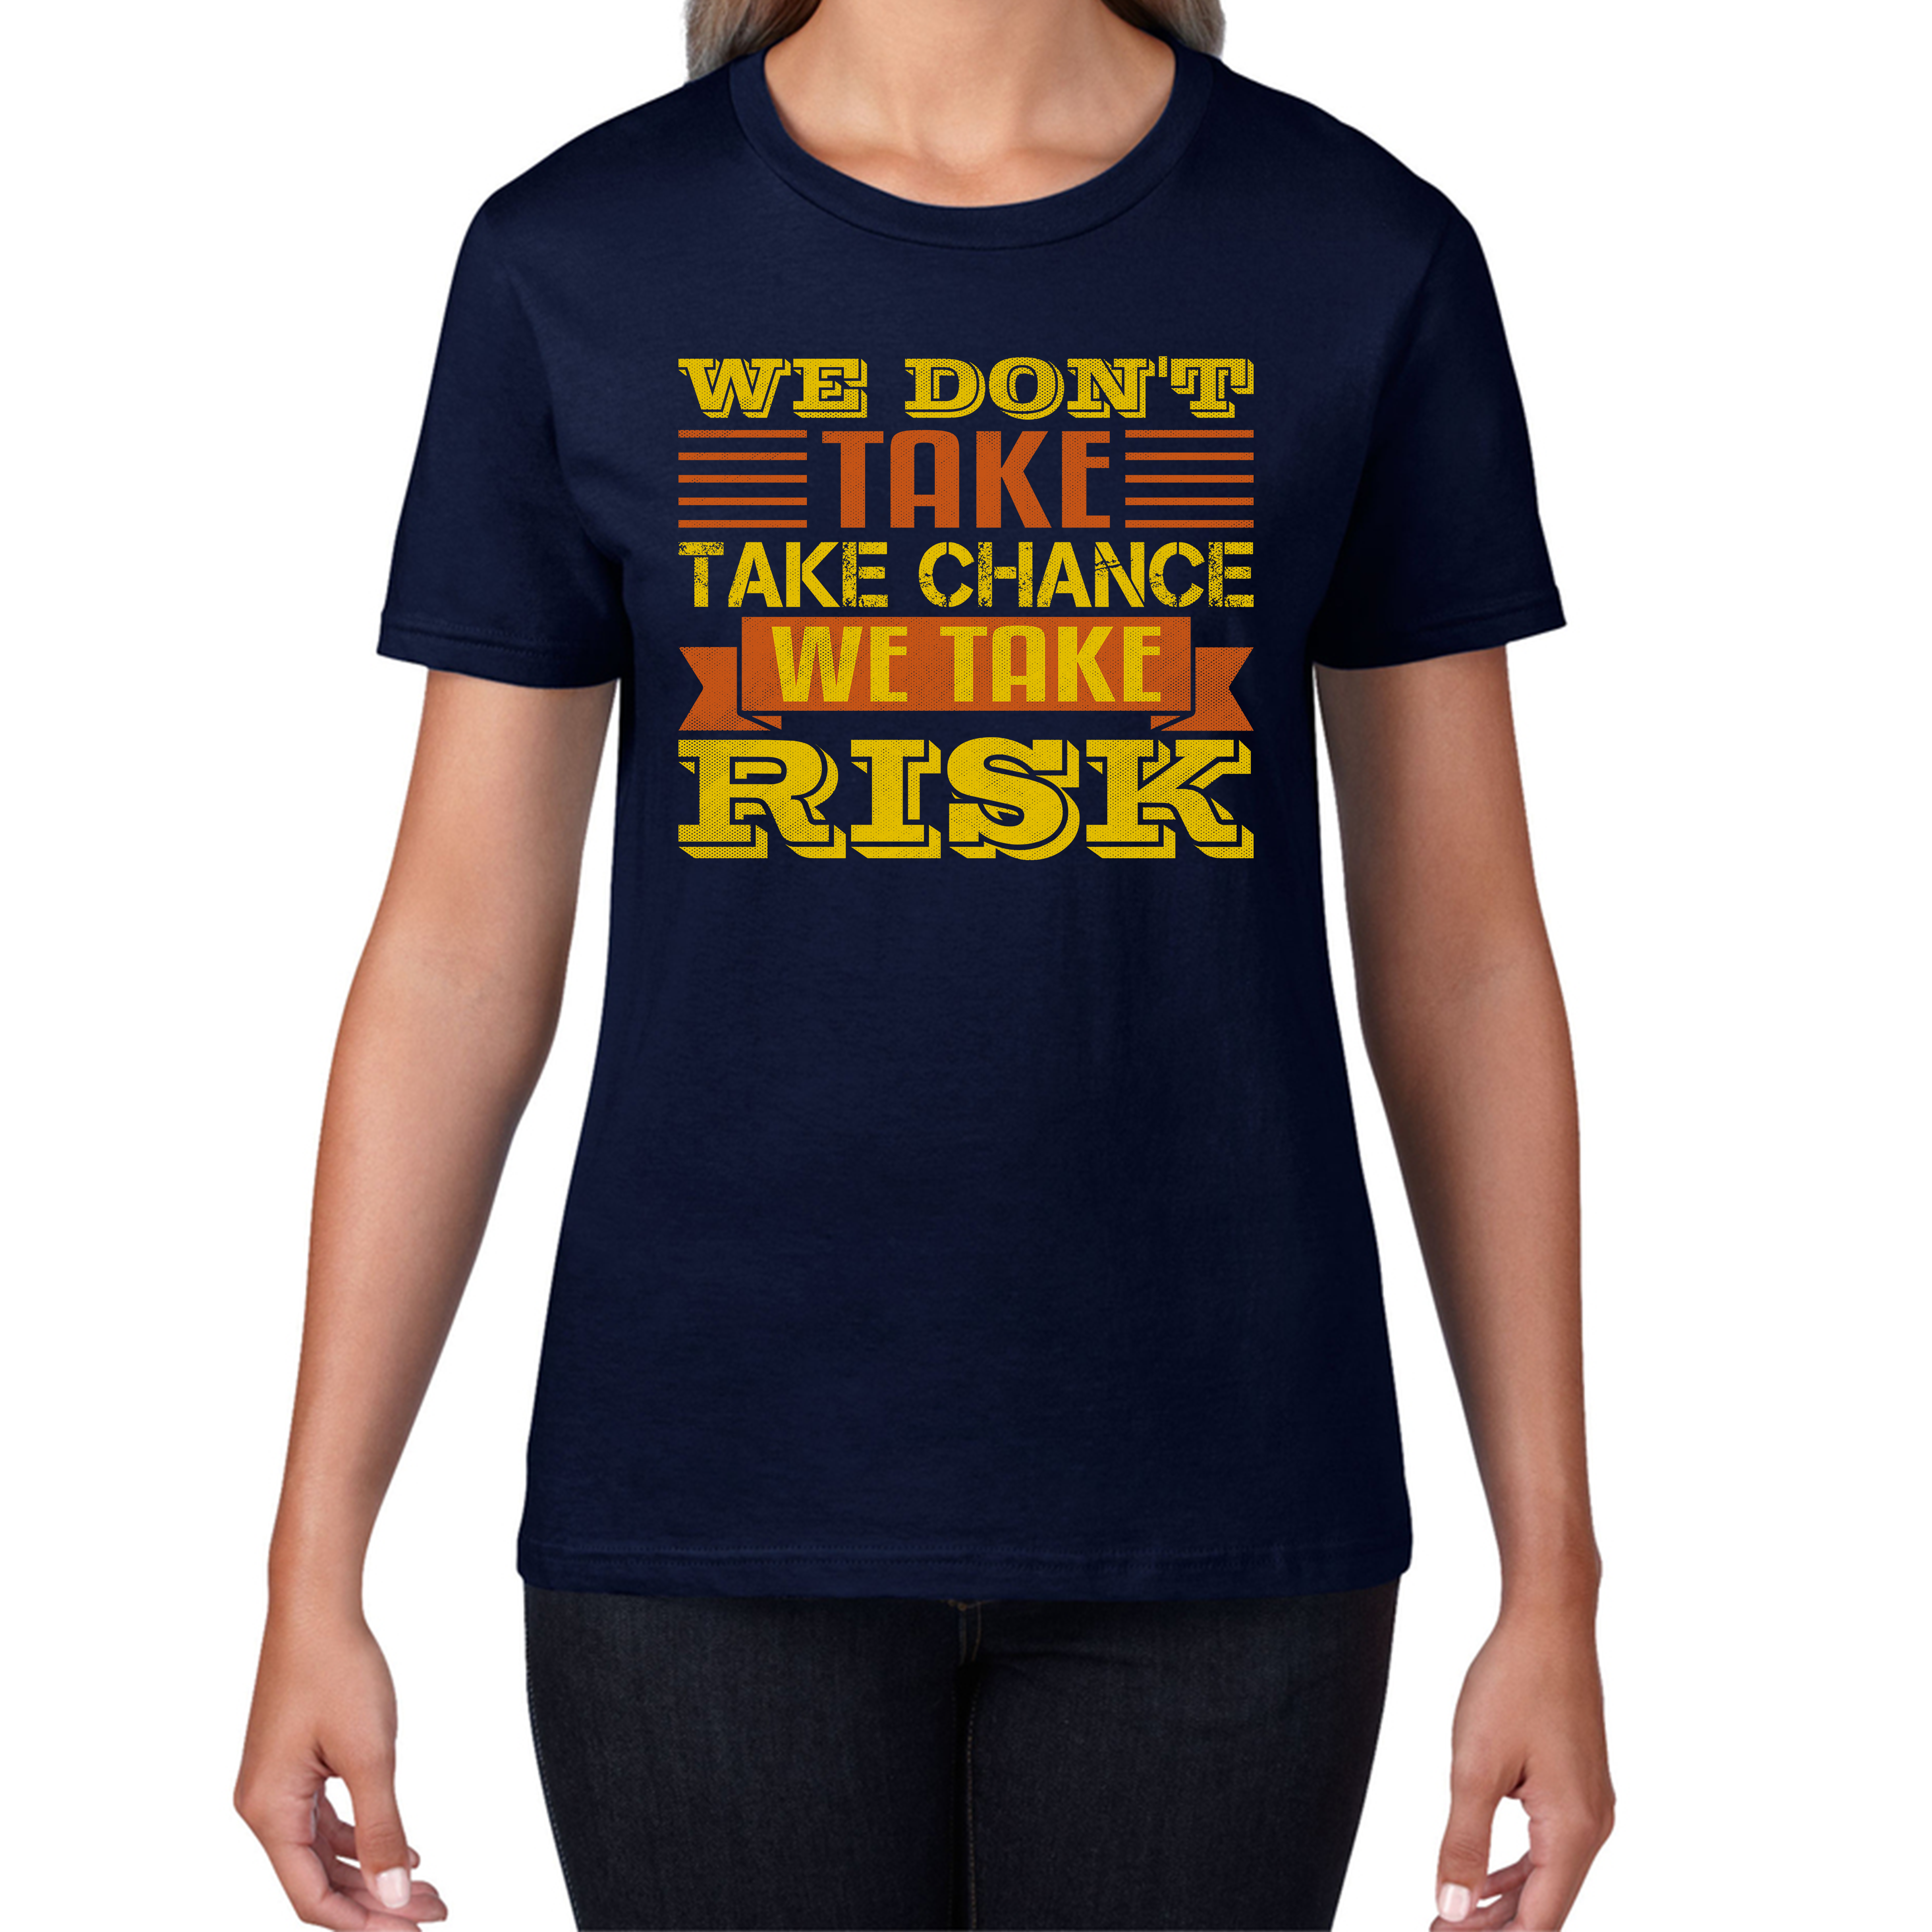 We Don't Take Chance We Take Risk, Risk Taker Funny Saying Womens Tee Top